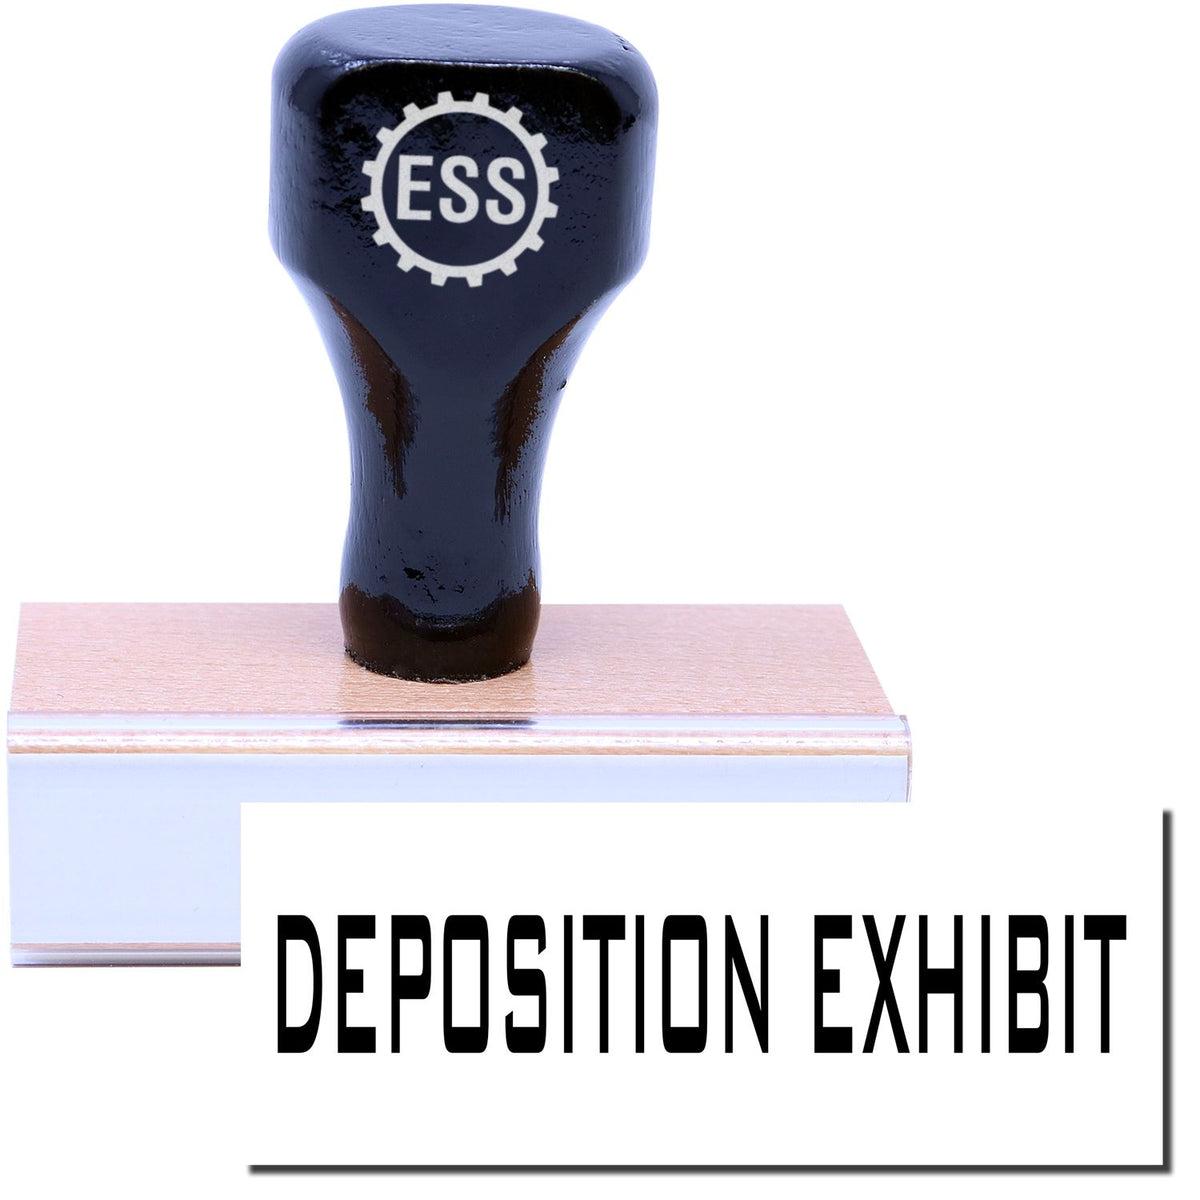 A stock office rubber stamp with a stamped image showing how the text &quot;DEPOSITION EXHIBIT&quot; in a large font is displayed after stamping.